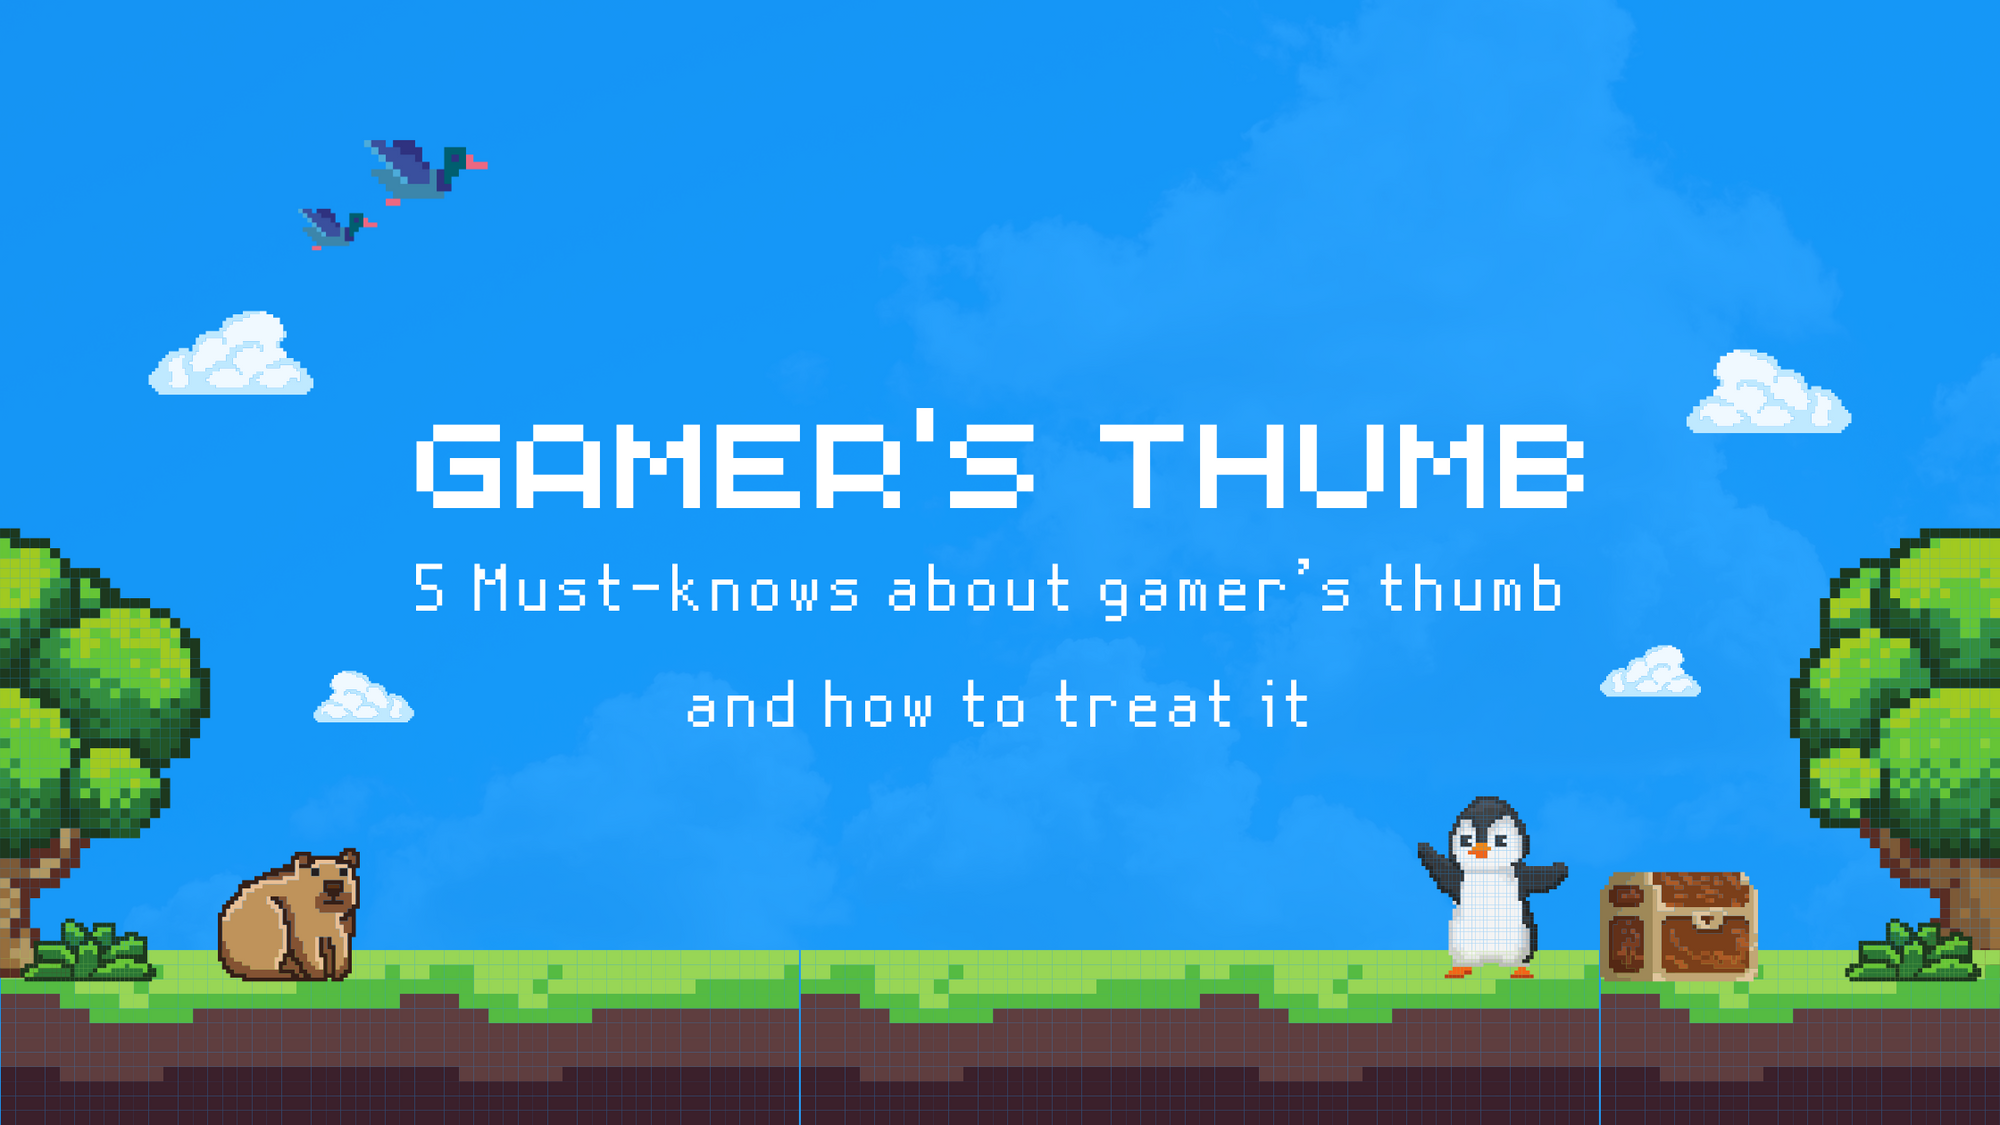 Must-knows about gamer’s thumb and how to treat it